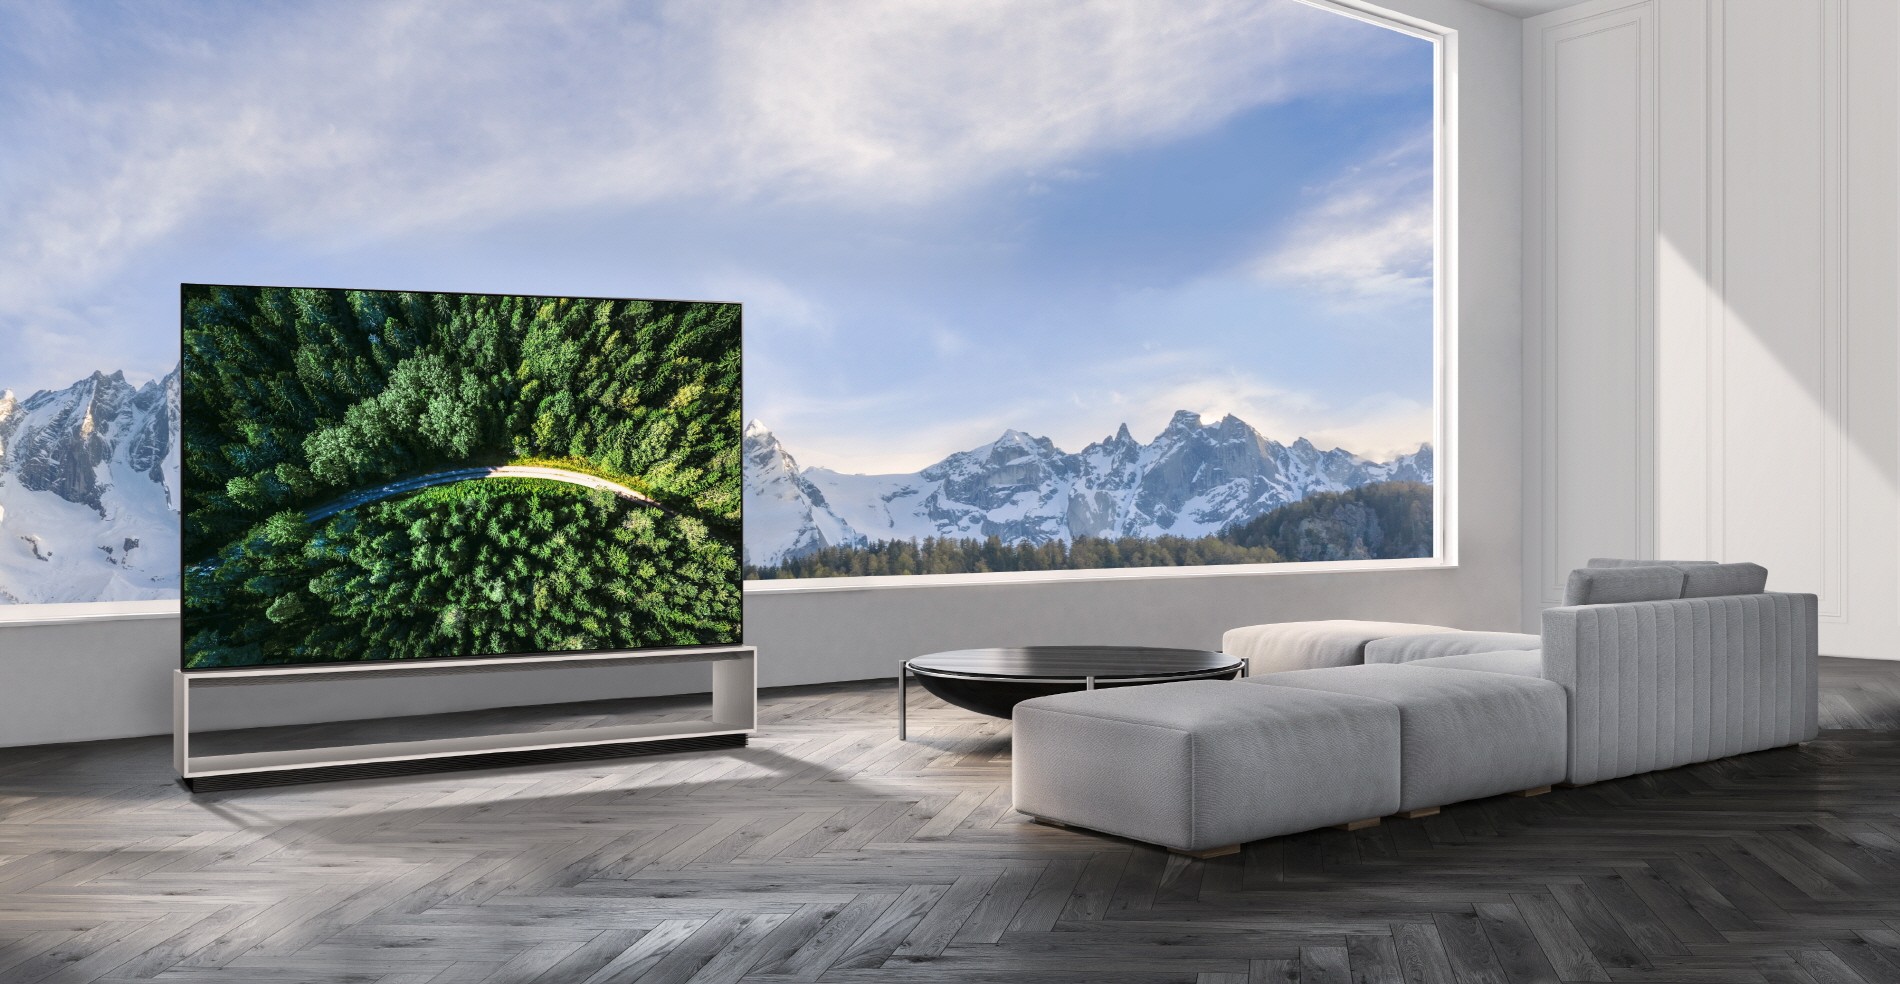 The LG SIGNATURE OLED 8K TV model 88Z9 showing a road in the woods is placed in a modern, spacious room with a spectacular view